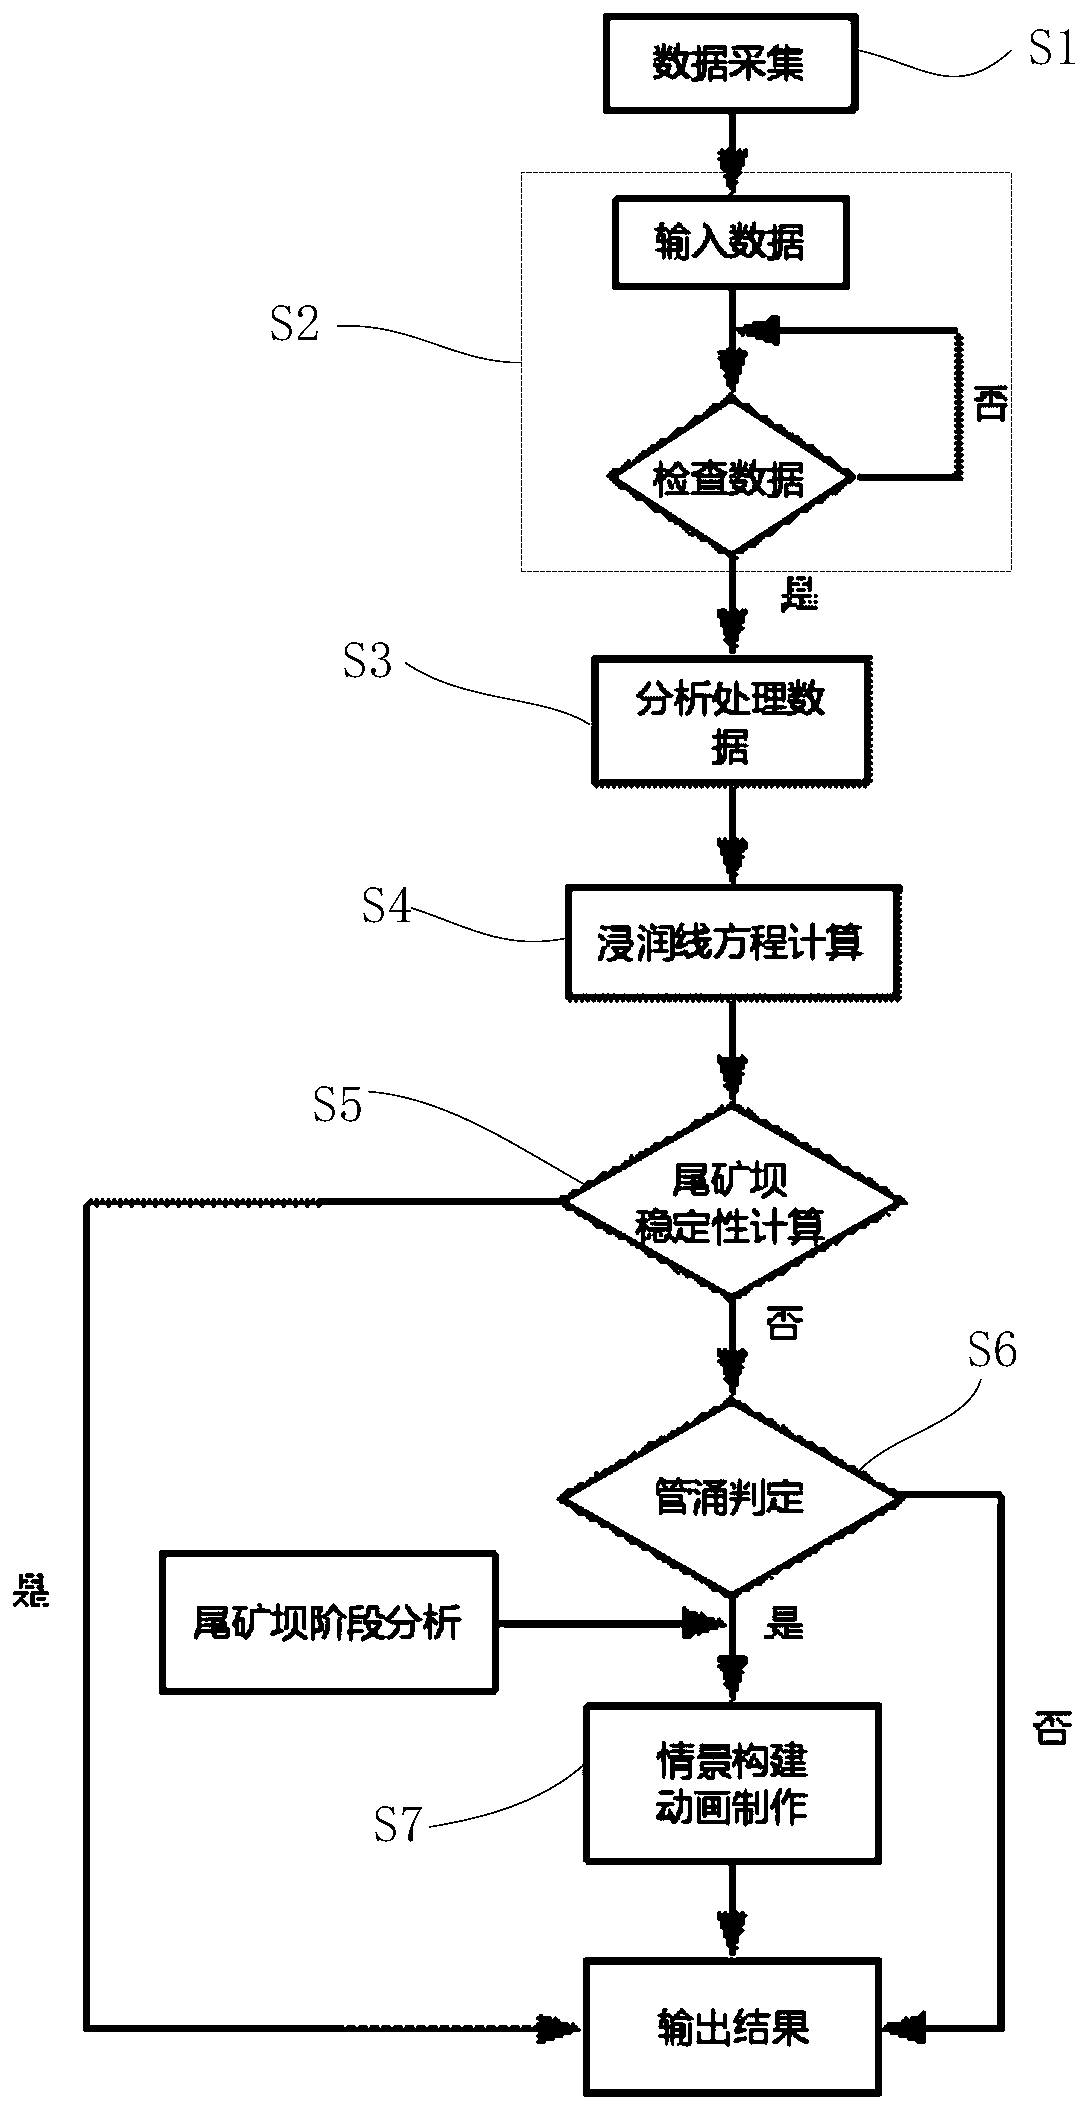 A tailings dam piping failure scenario construction system and method